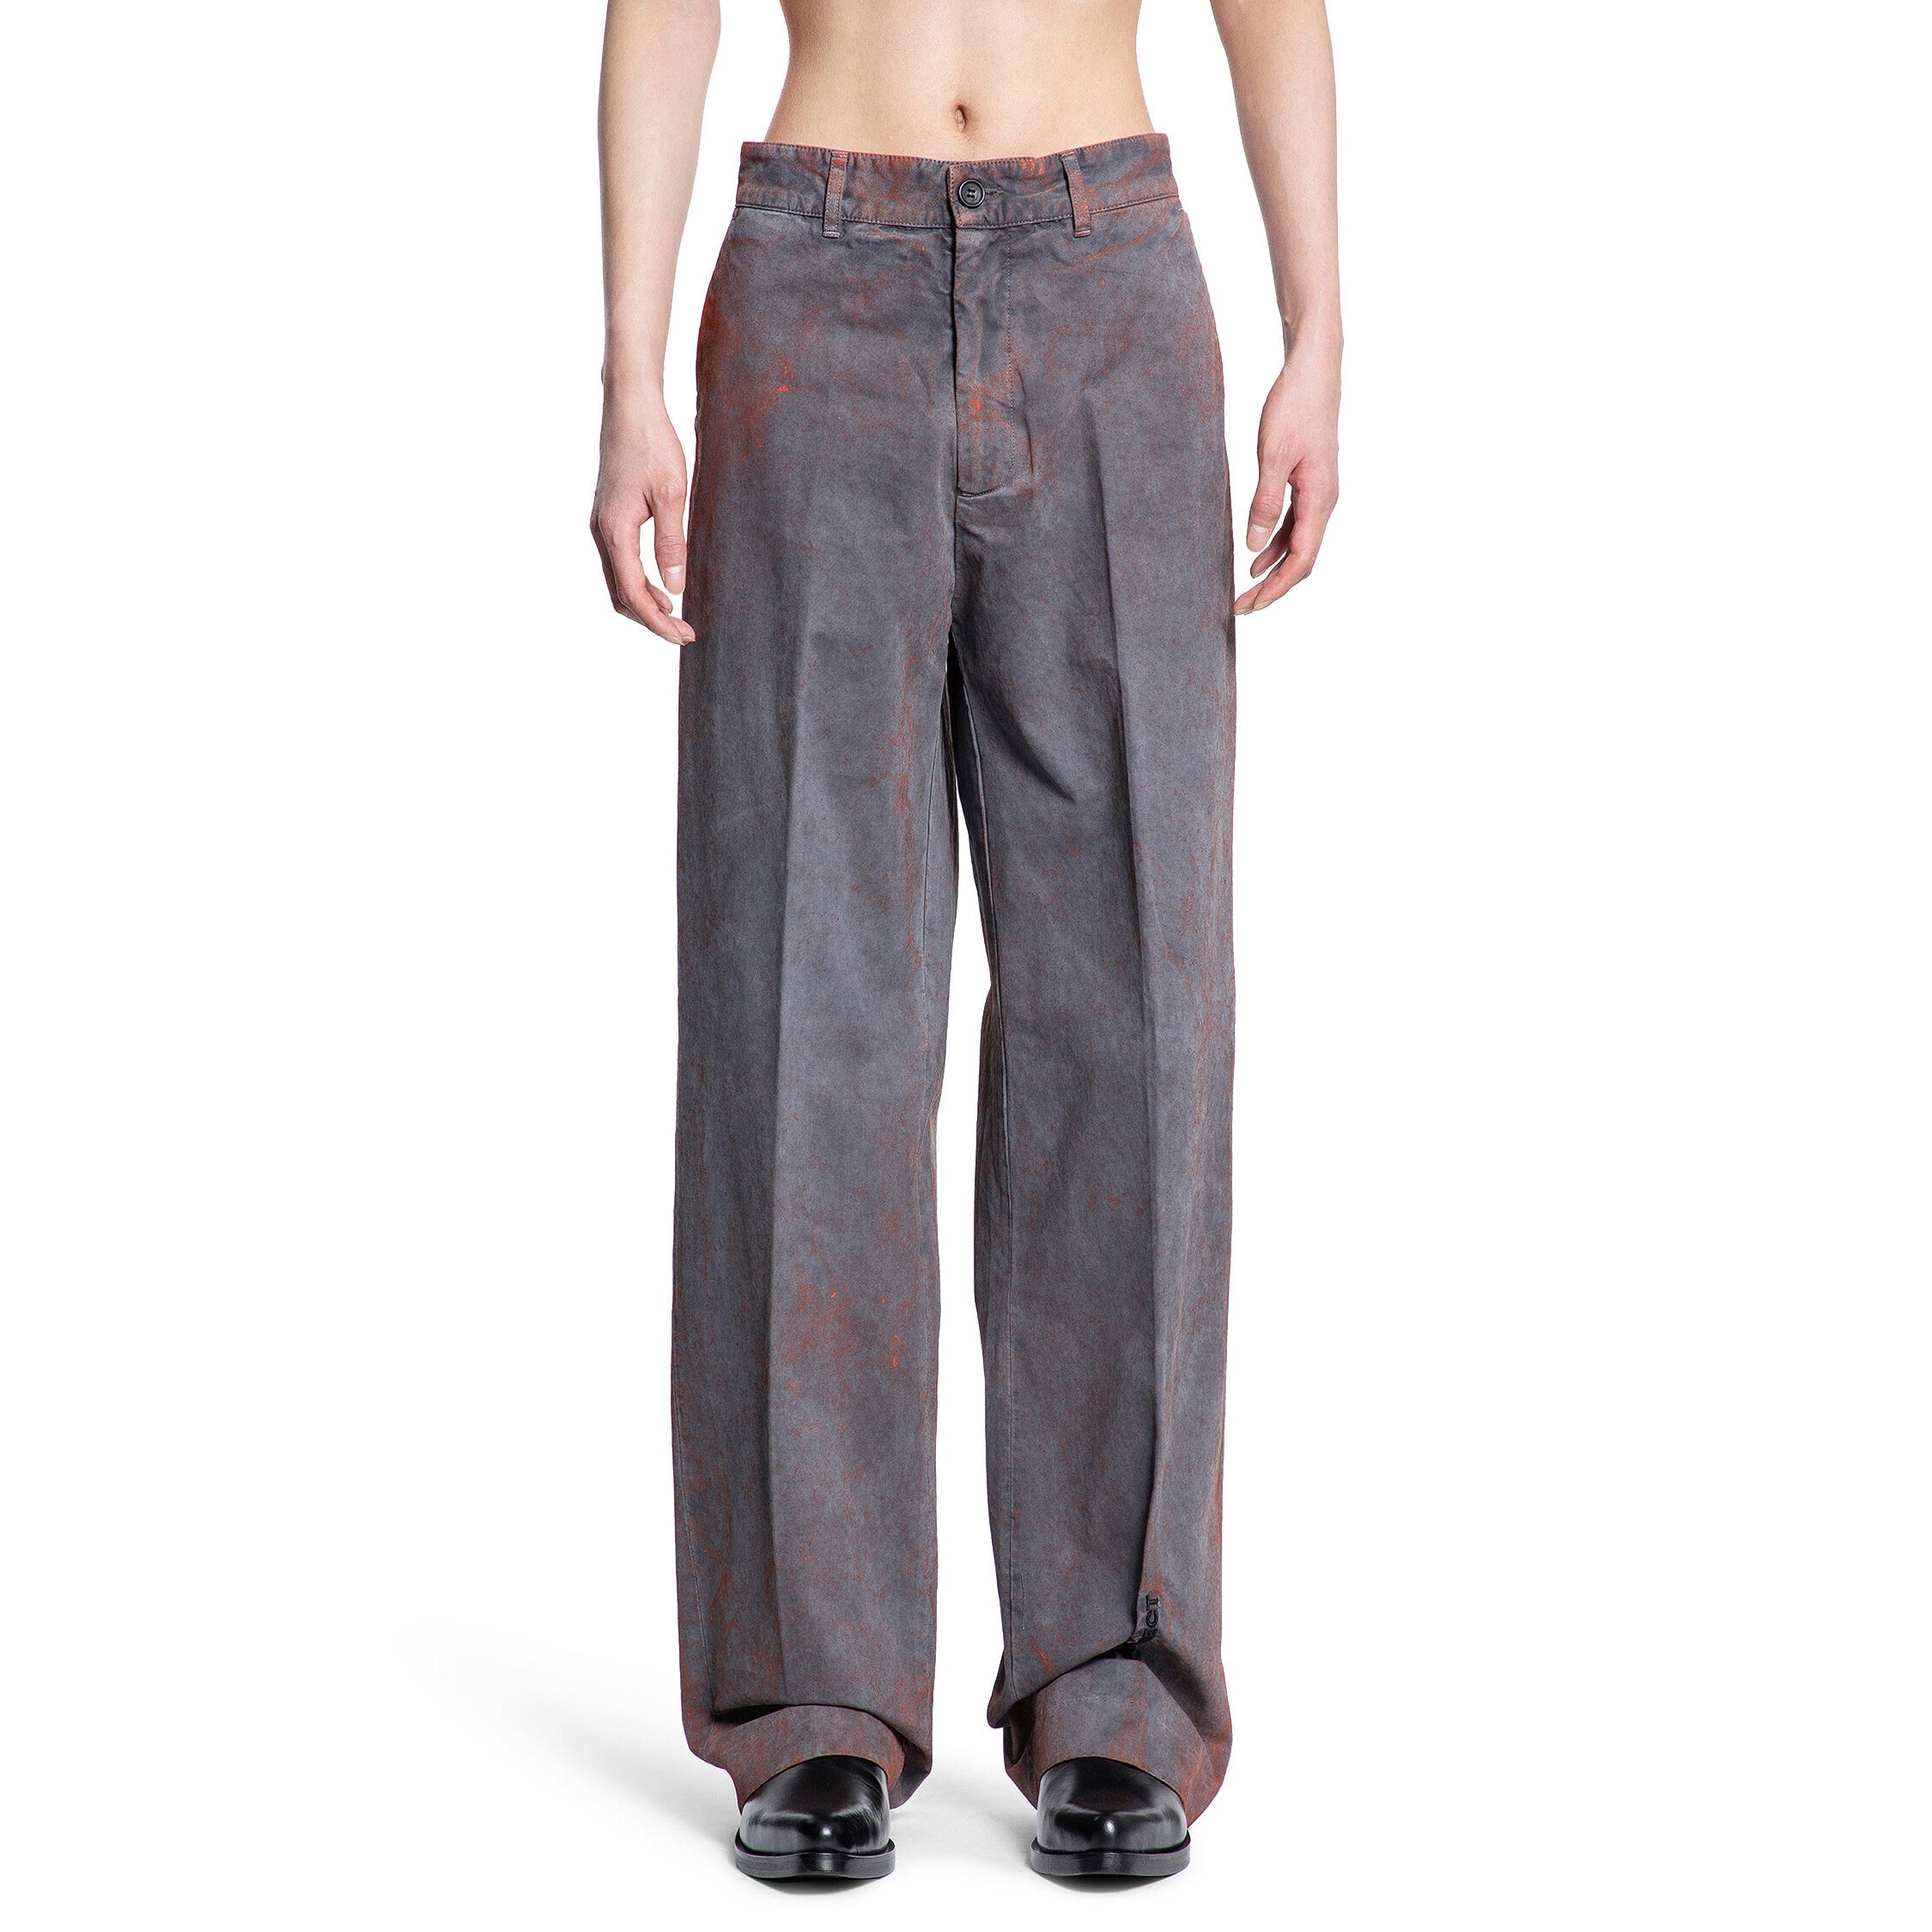 Y/PROJECT MAN GREY TROUSERS - 6